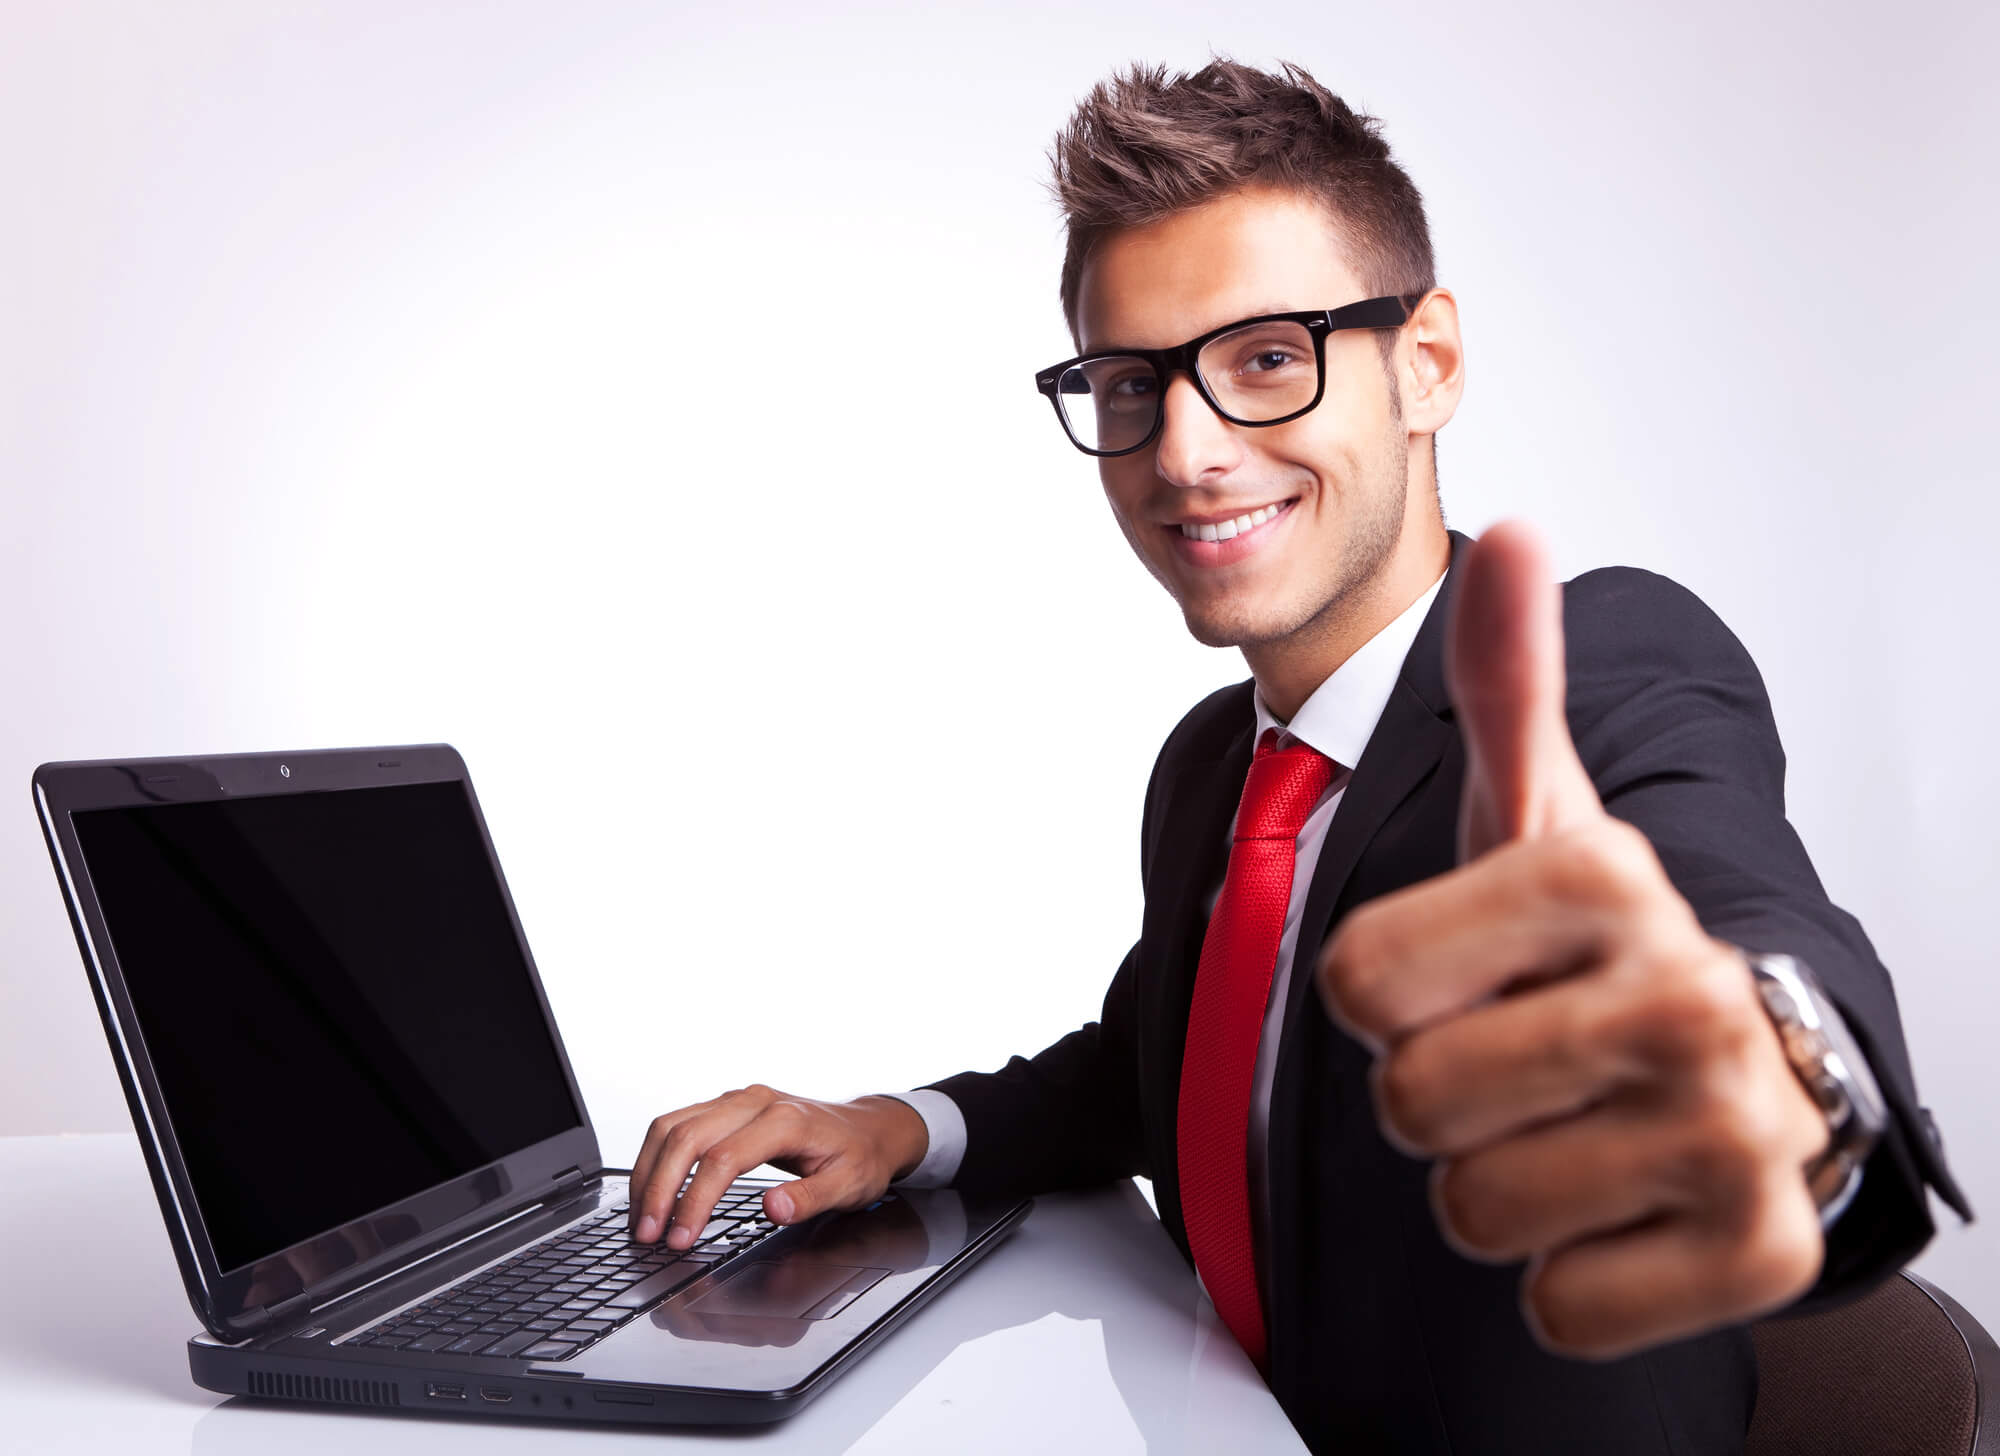 business person giving a thumbs up sign after buying an insurance agency